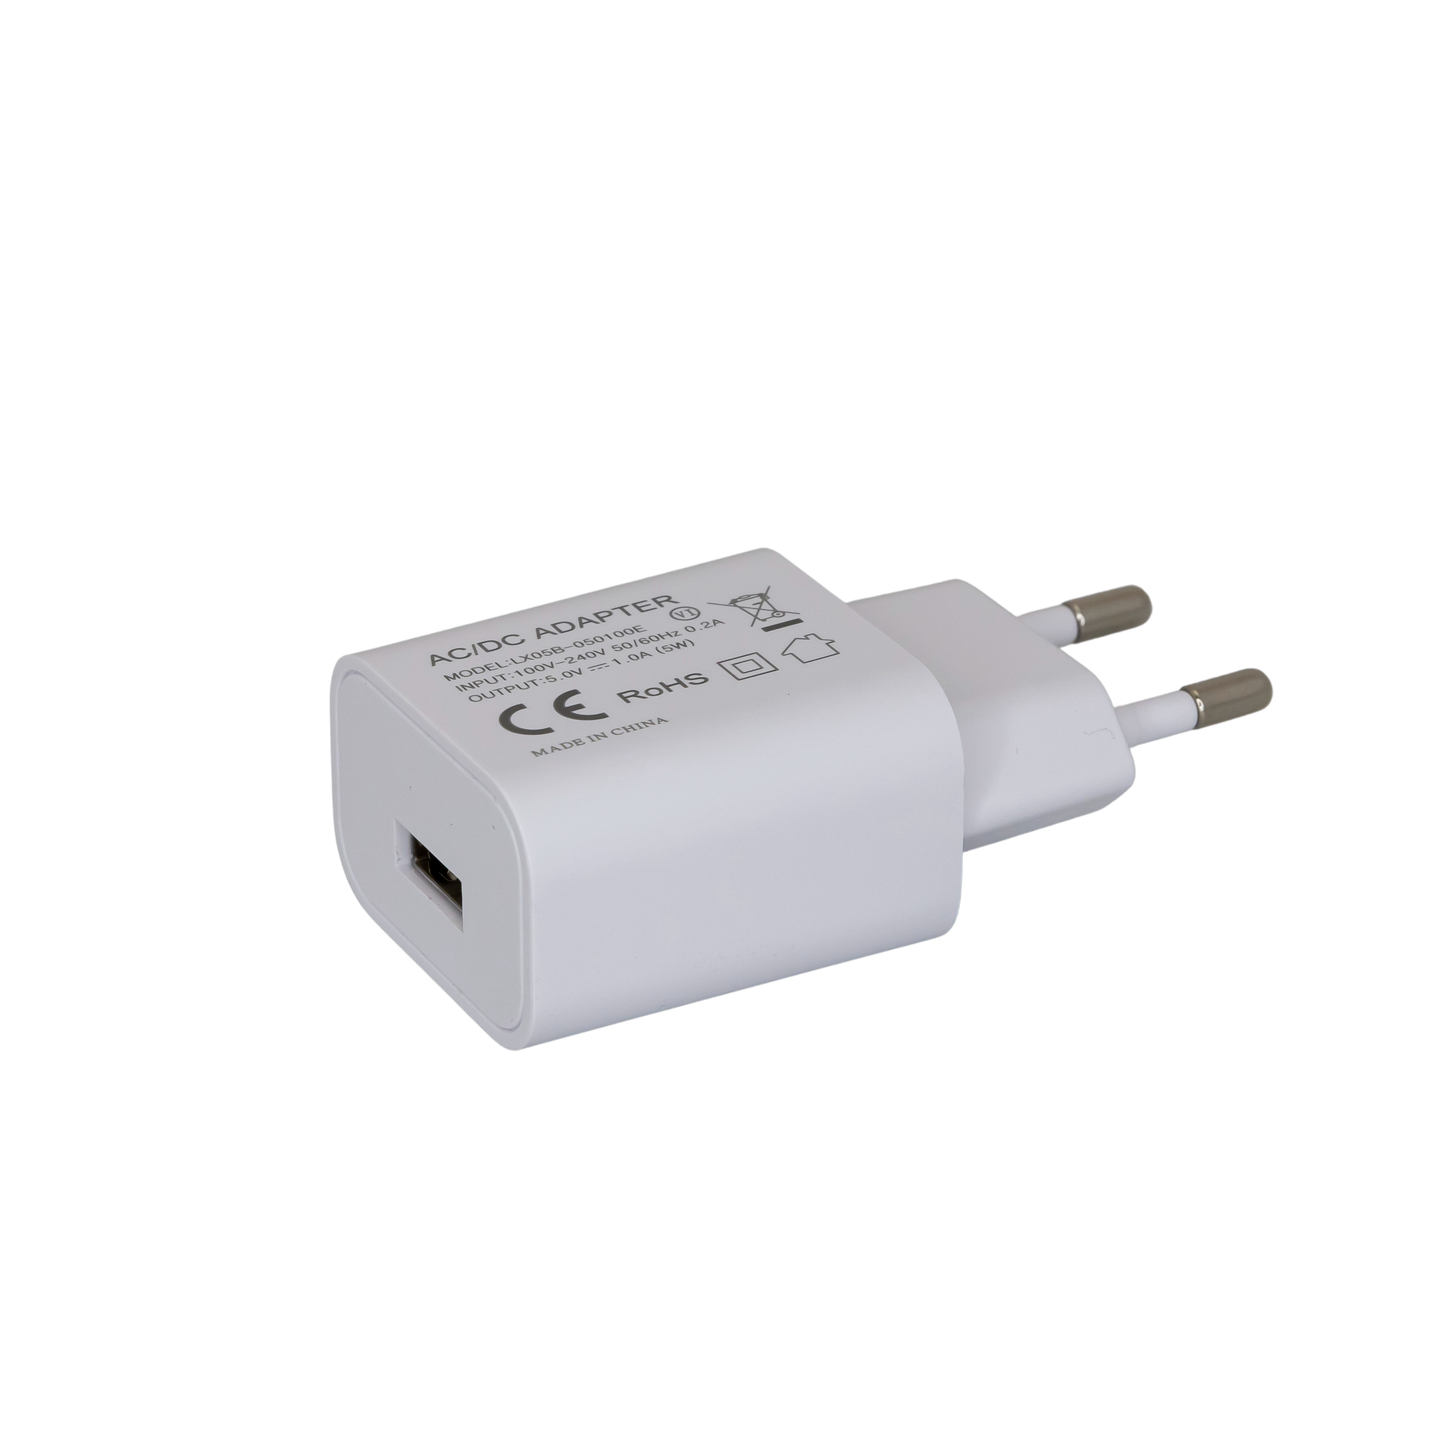 Cozzy USB Charger in White - Efficient and Compact